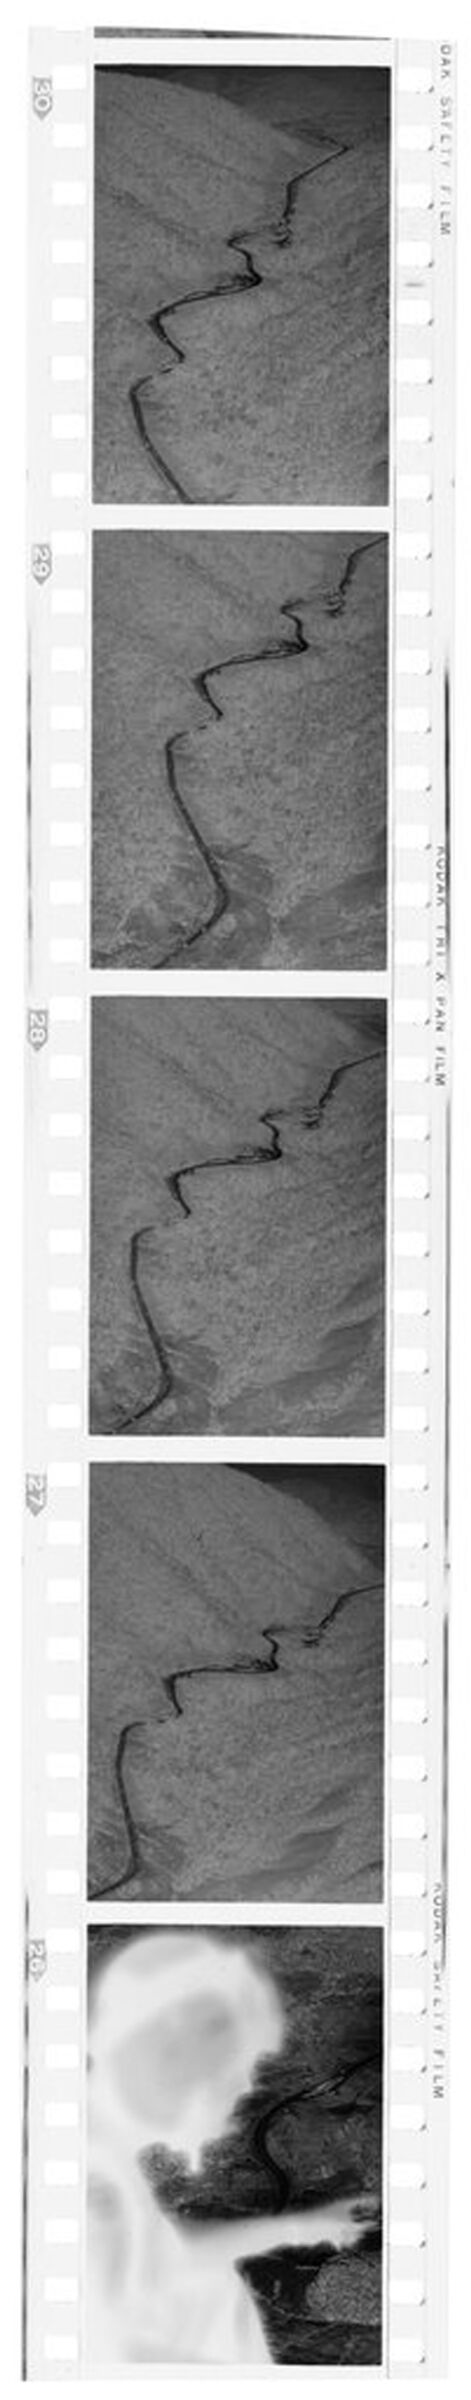 Untitled (Aerial View Of River Valley From Helicopter, Vietnam)